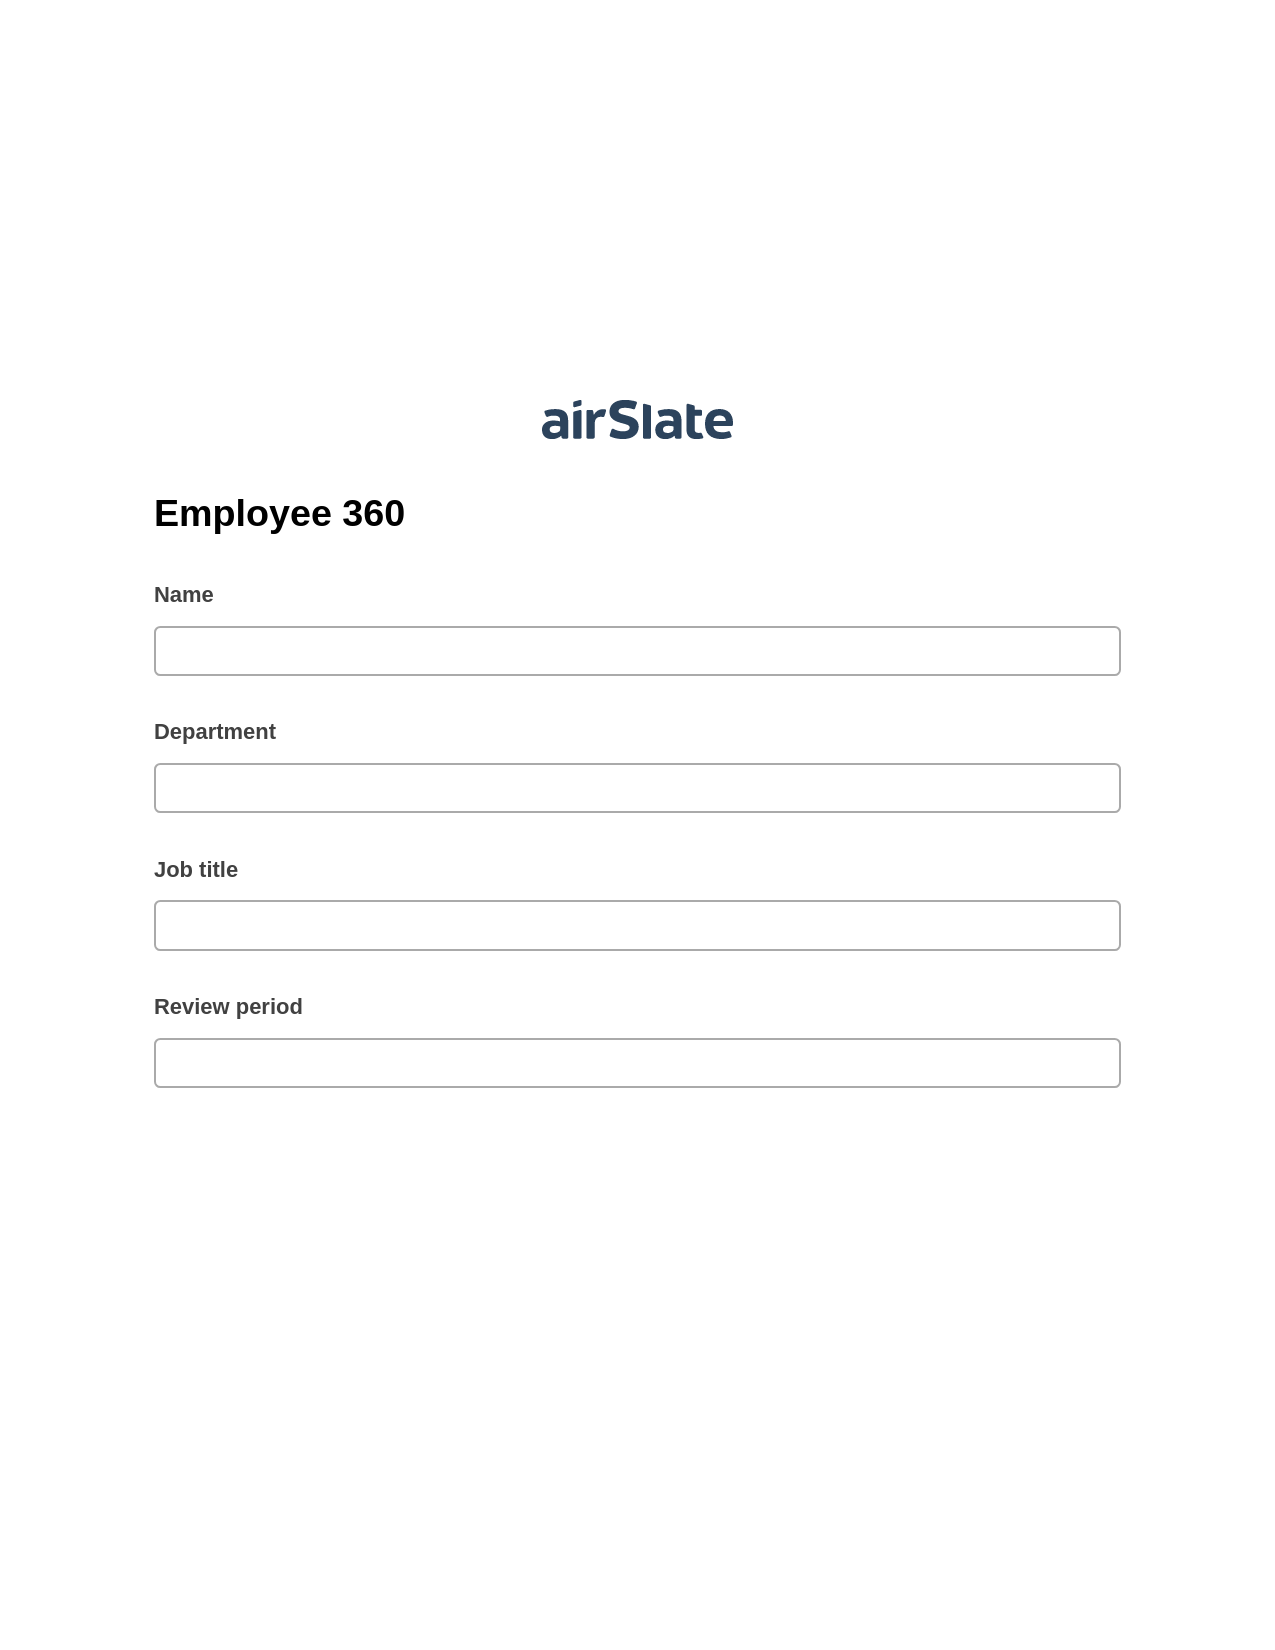 Multirole Employee 360 Pre-fill from Salesforce Records Bot, Remove Slate Bot, Export to WebMerge Bot